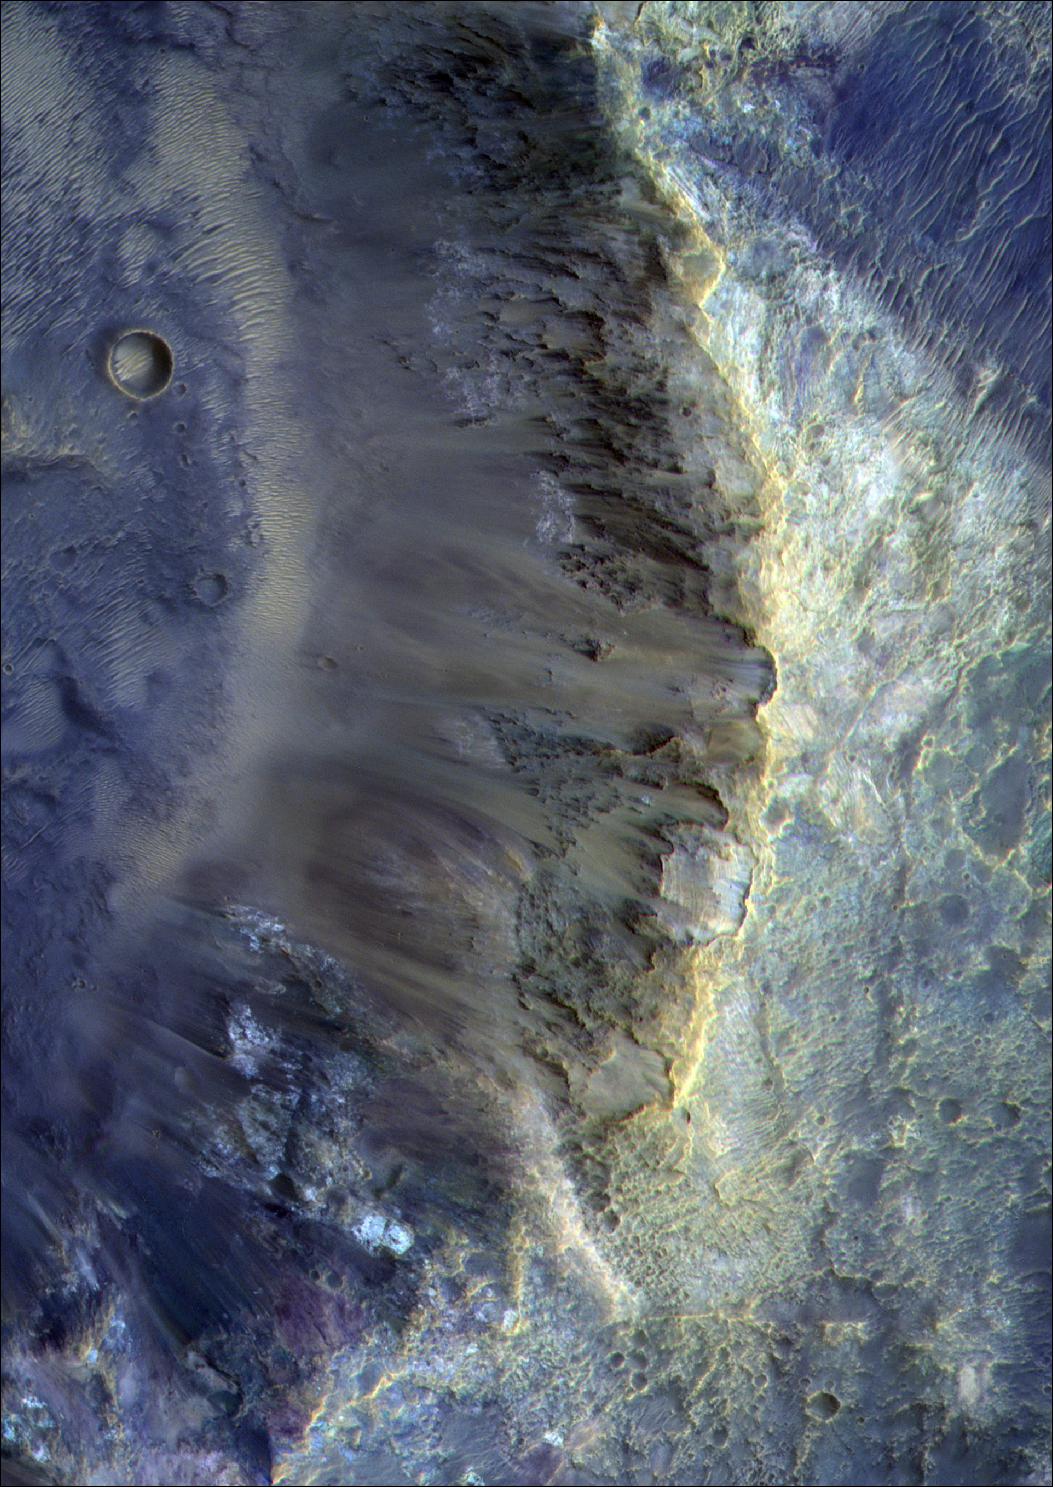 Figure 37: This image features the southeast wall of a small crater located a few hundred kilometers to the north of the giant Hellas impact basin on Mars. The complete crater itself is about 12 km in diameter; this image shows a 5 x 10 km area. When viewed with CaSSIS’ color filters, the image shows exceptional diversity in color. This diversity is related to the presence of various minerals that reflect light differently at different wavelengths. The light-toned deposits highlight the bedrock exposures of the area, which probably contain ancient clay-rich minerals that would have formed in the presence of water. Also visible are wind-blown sandy deposits that form ripples on the floor of the crater. Their distinctive tan color implies that they contain iron-oxide minerals. The image was featured by Science Advances online in February 2021 (image credit: ESA/Roscosmos/CaSSIS, CC BY-SA 3.0 IGO)